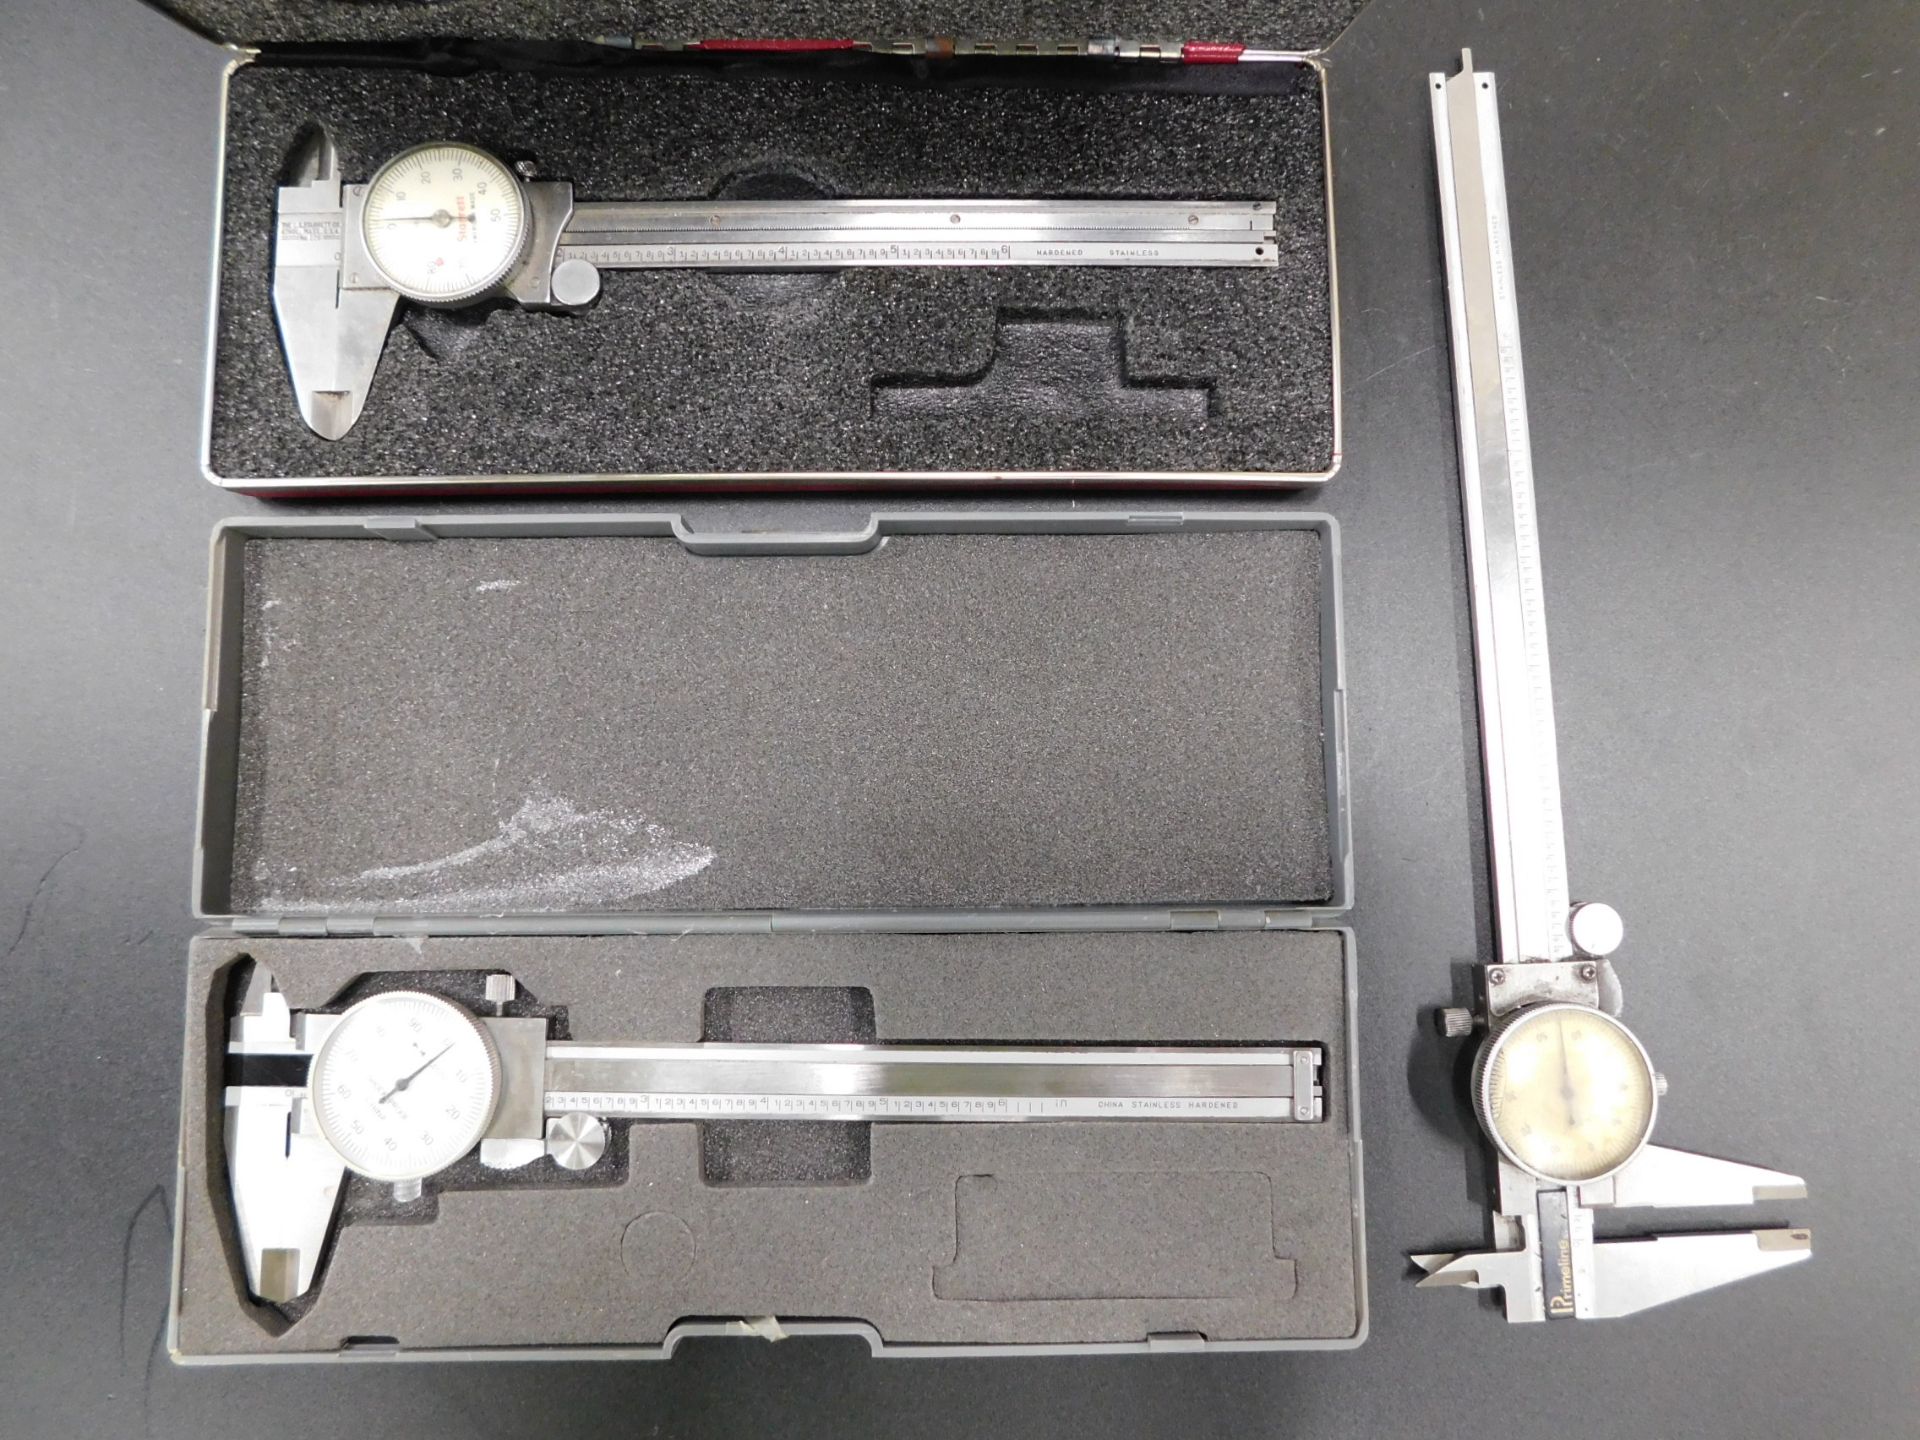 (2) 6" and (1) 8" Dial Calipers